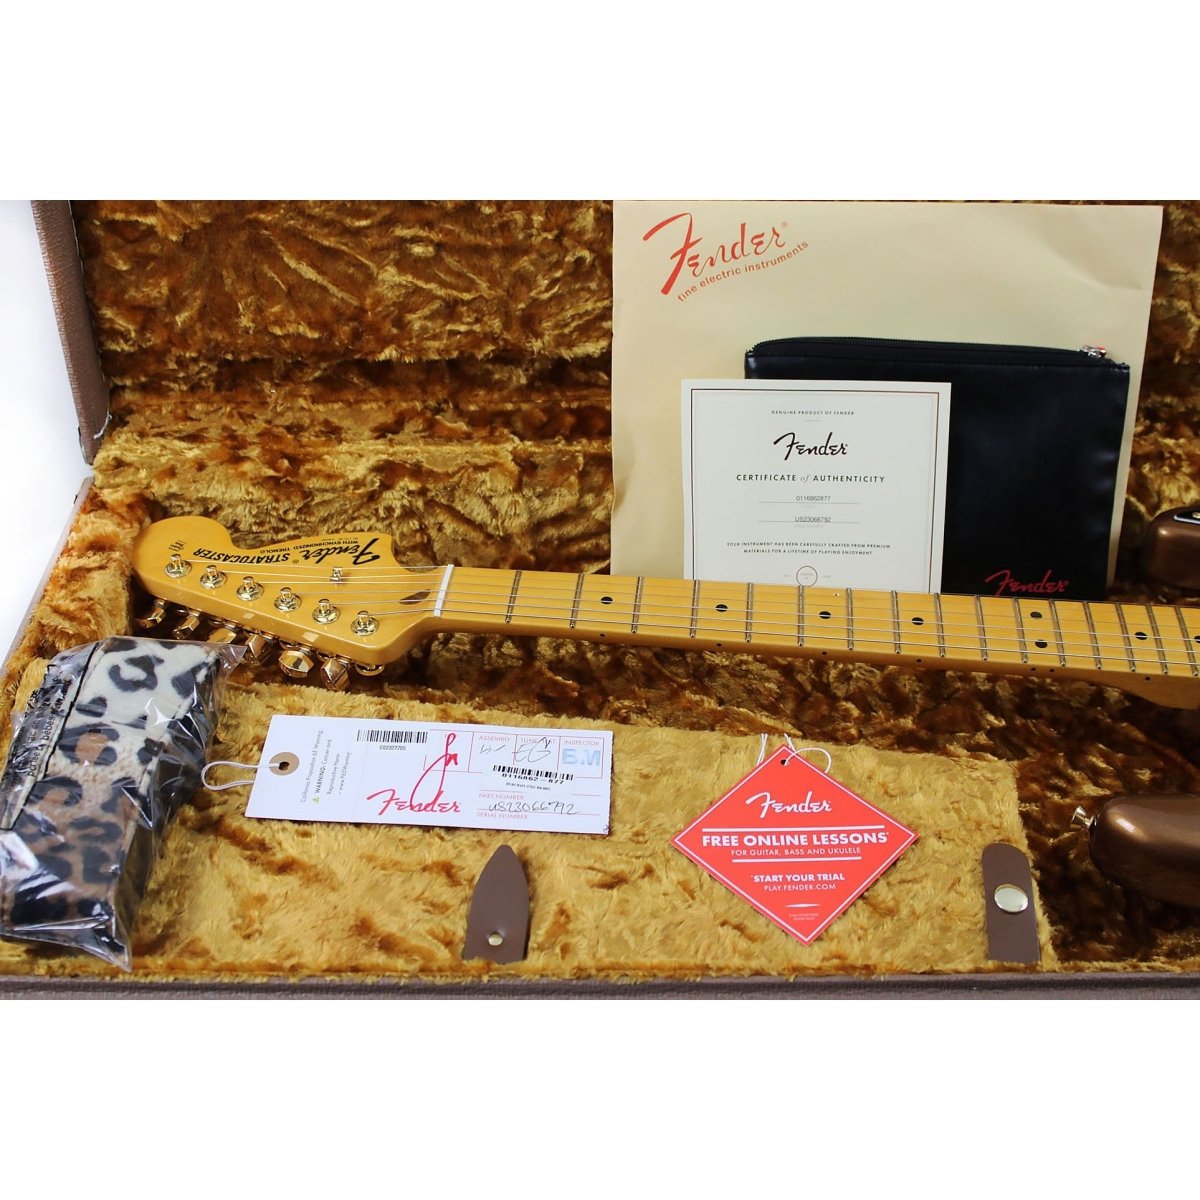 Limited Edition Bruno Mars Stratocaster®